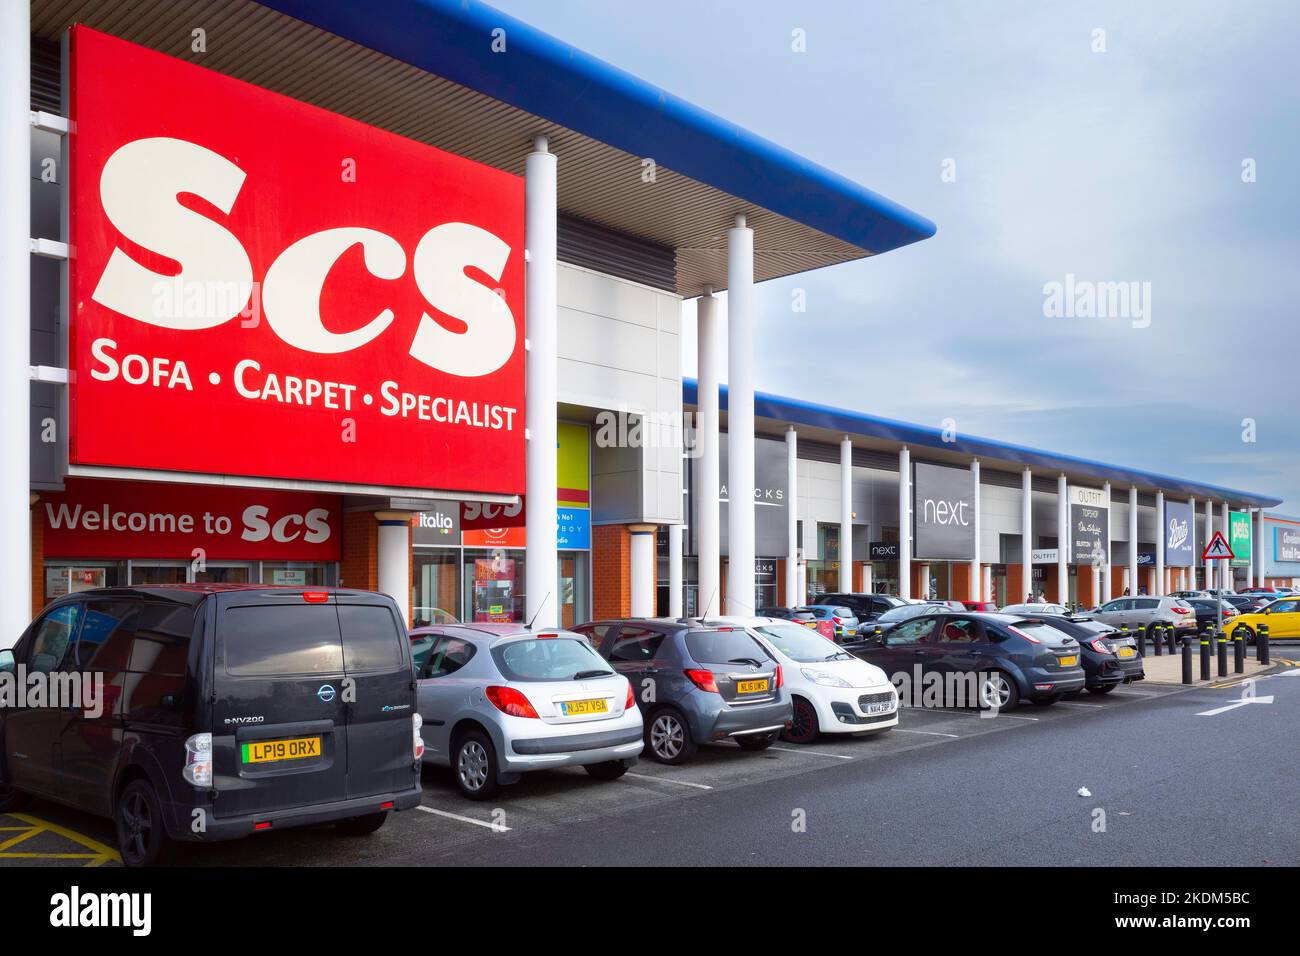 Cars parked in the Cleveland Retail Park where there are many well known traders  including SCS selling Sofas and Carpets. Stock Photo